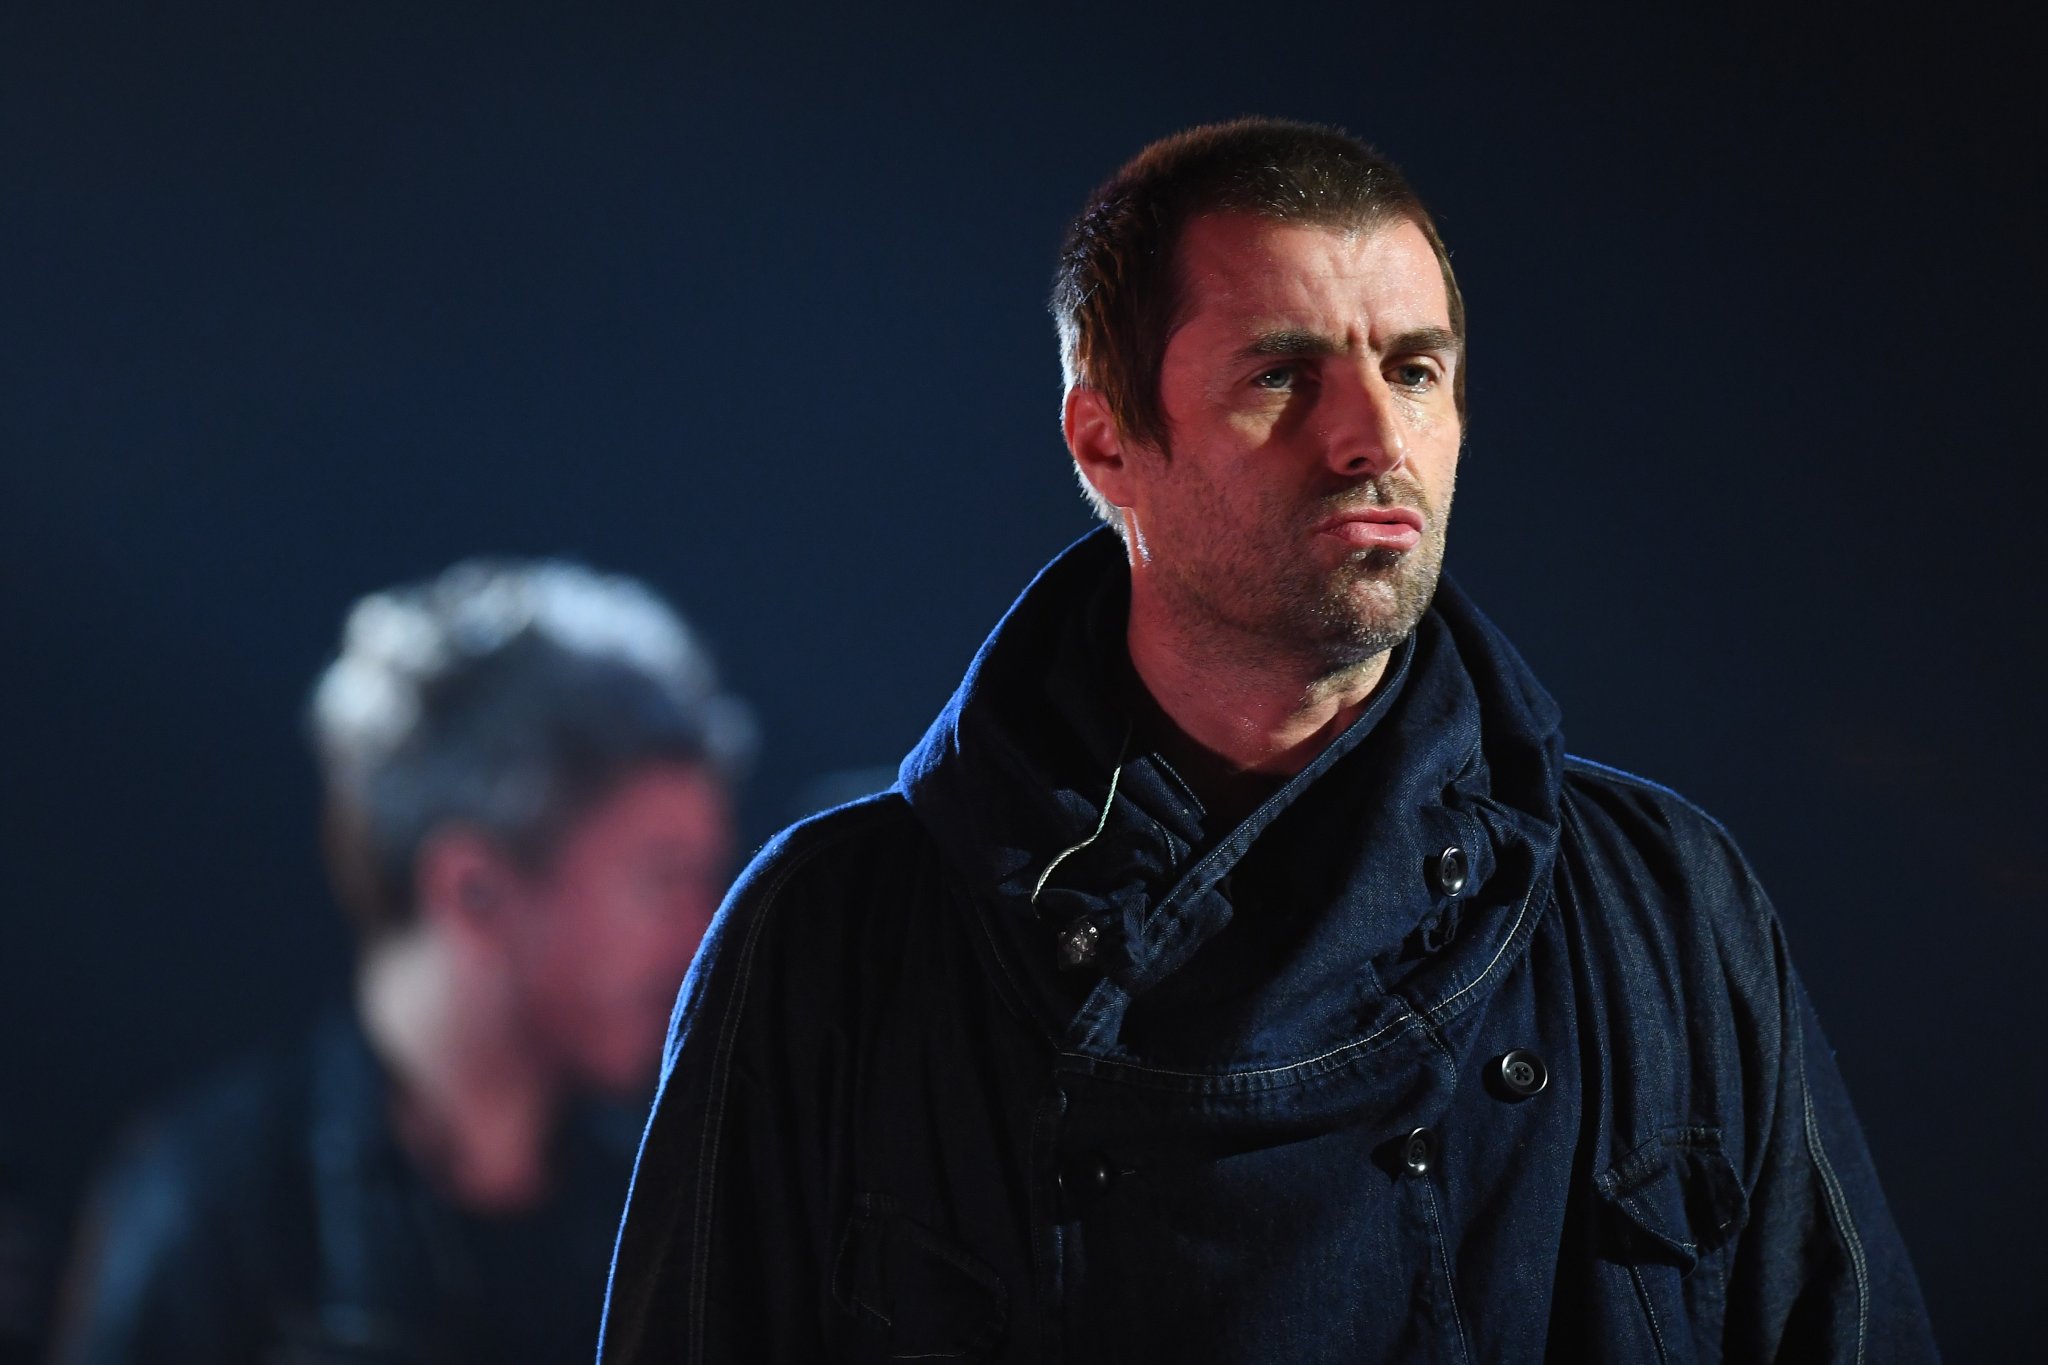 Liam Gallagher Accuses Noel Gallagher of Trying to Shut Down His Twitter